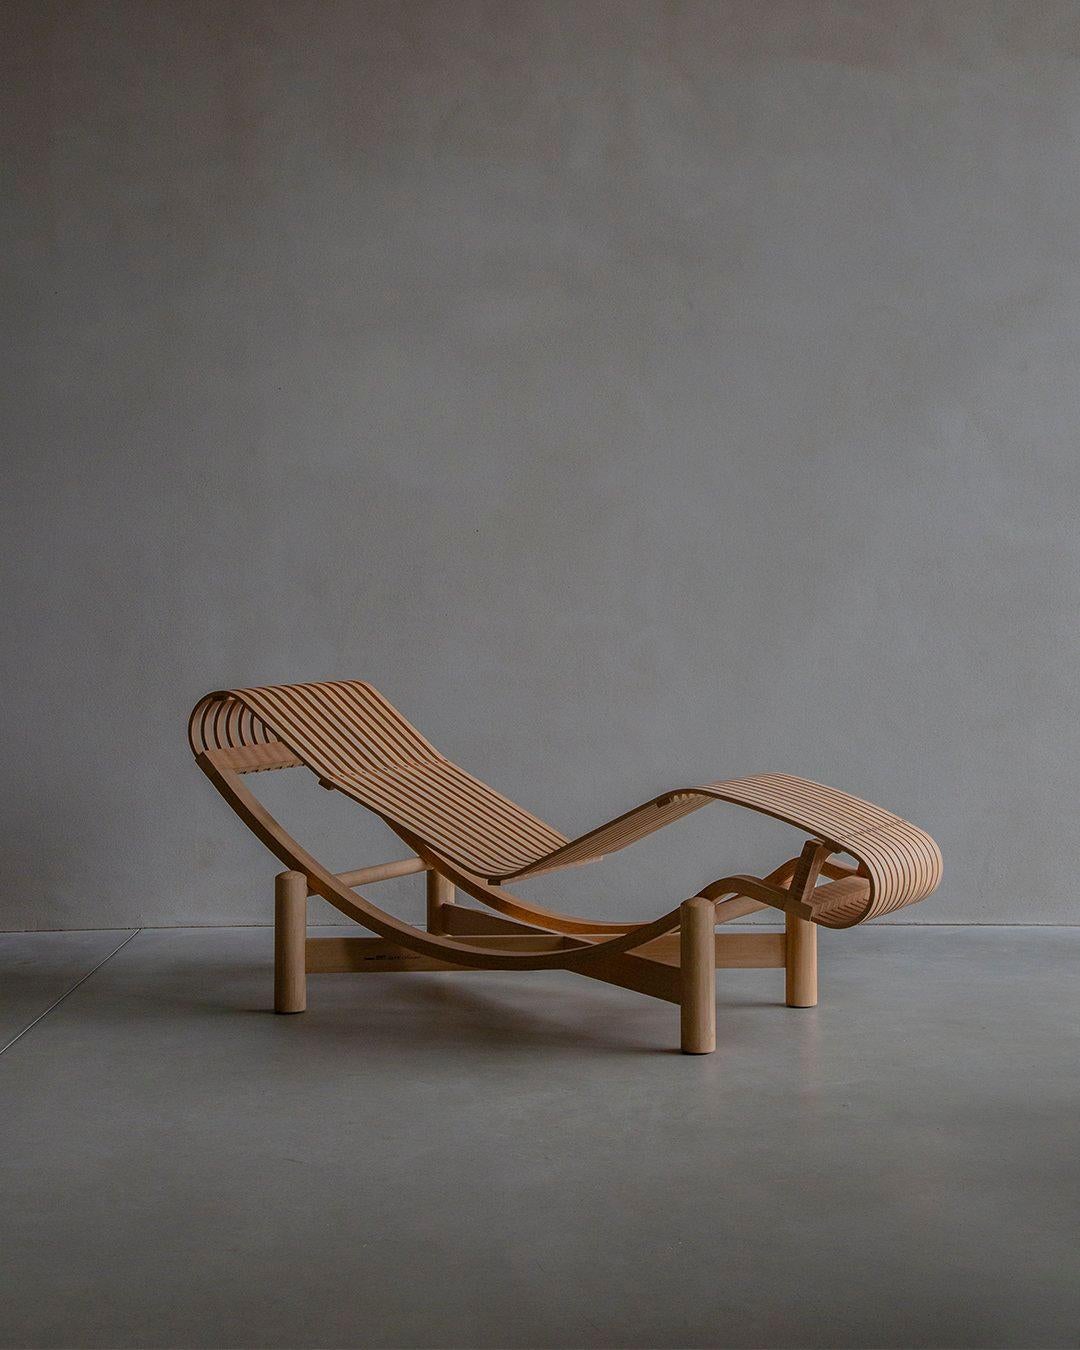 A historic masterpiece in furniture, the '522 Tokyo' Lounge Chair by Charlotte Perriand stands as a testament to exceptional design. Originally conceptualized in 1940, this piece was commercialized in 2011 under Cassina's production. Crafted from